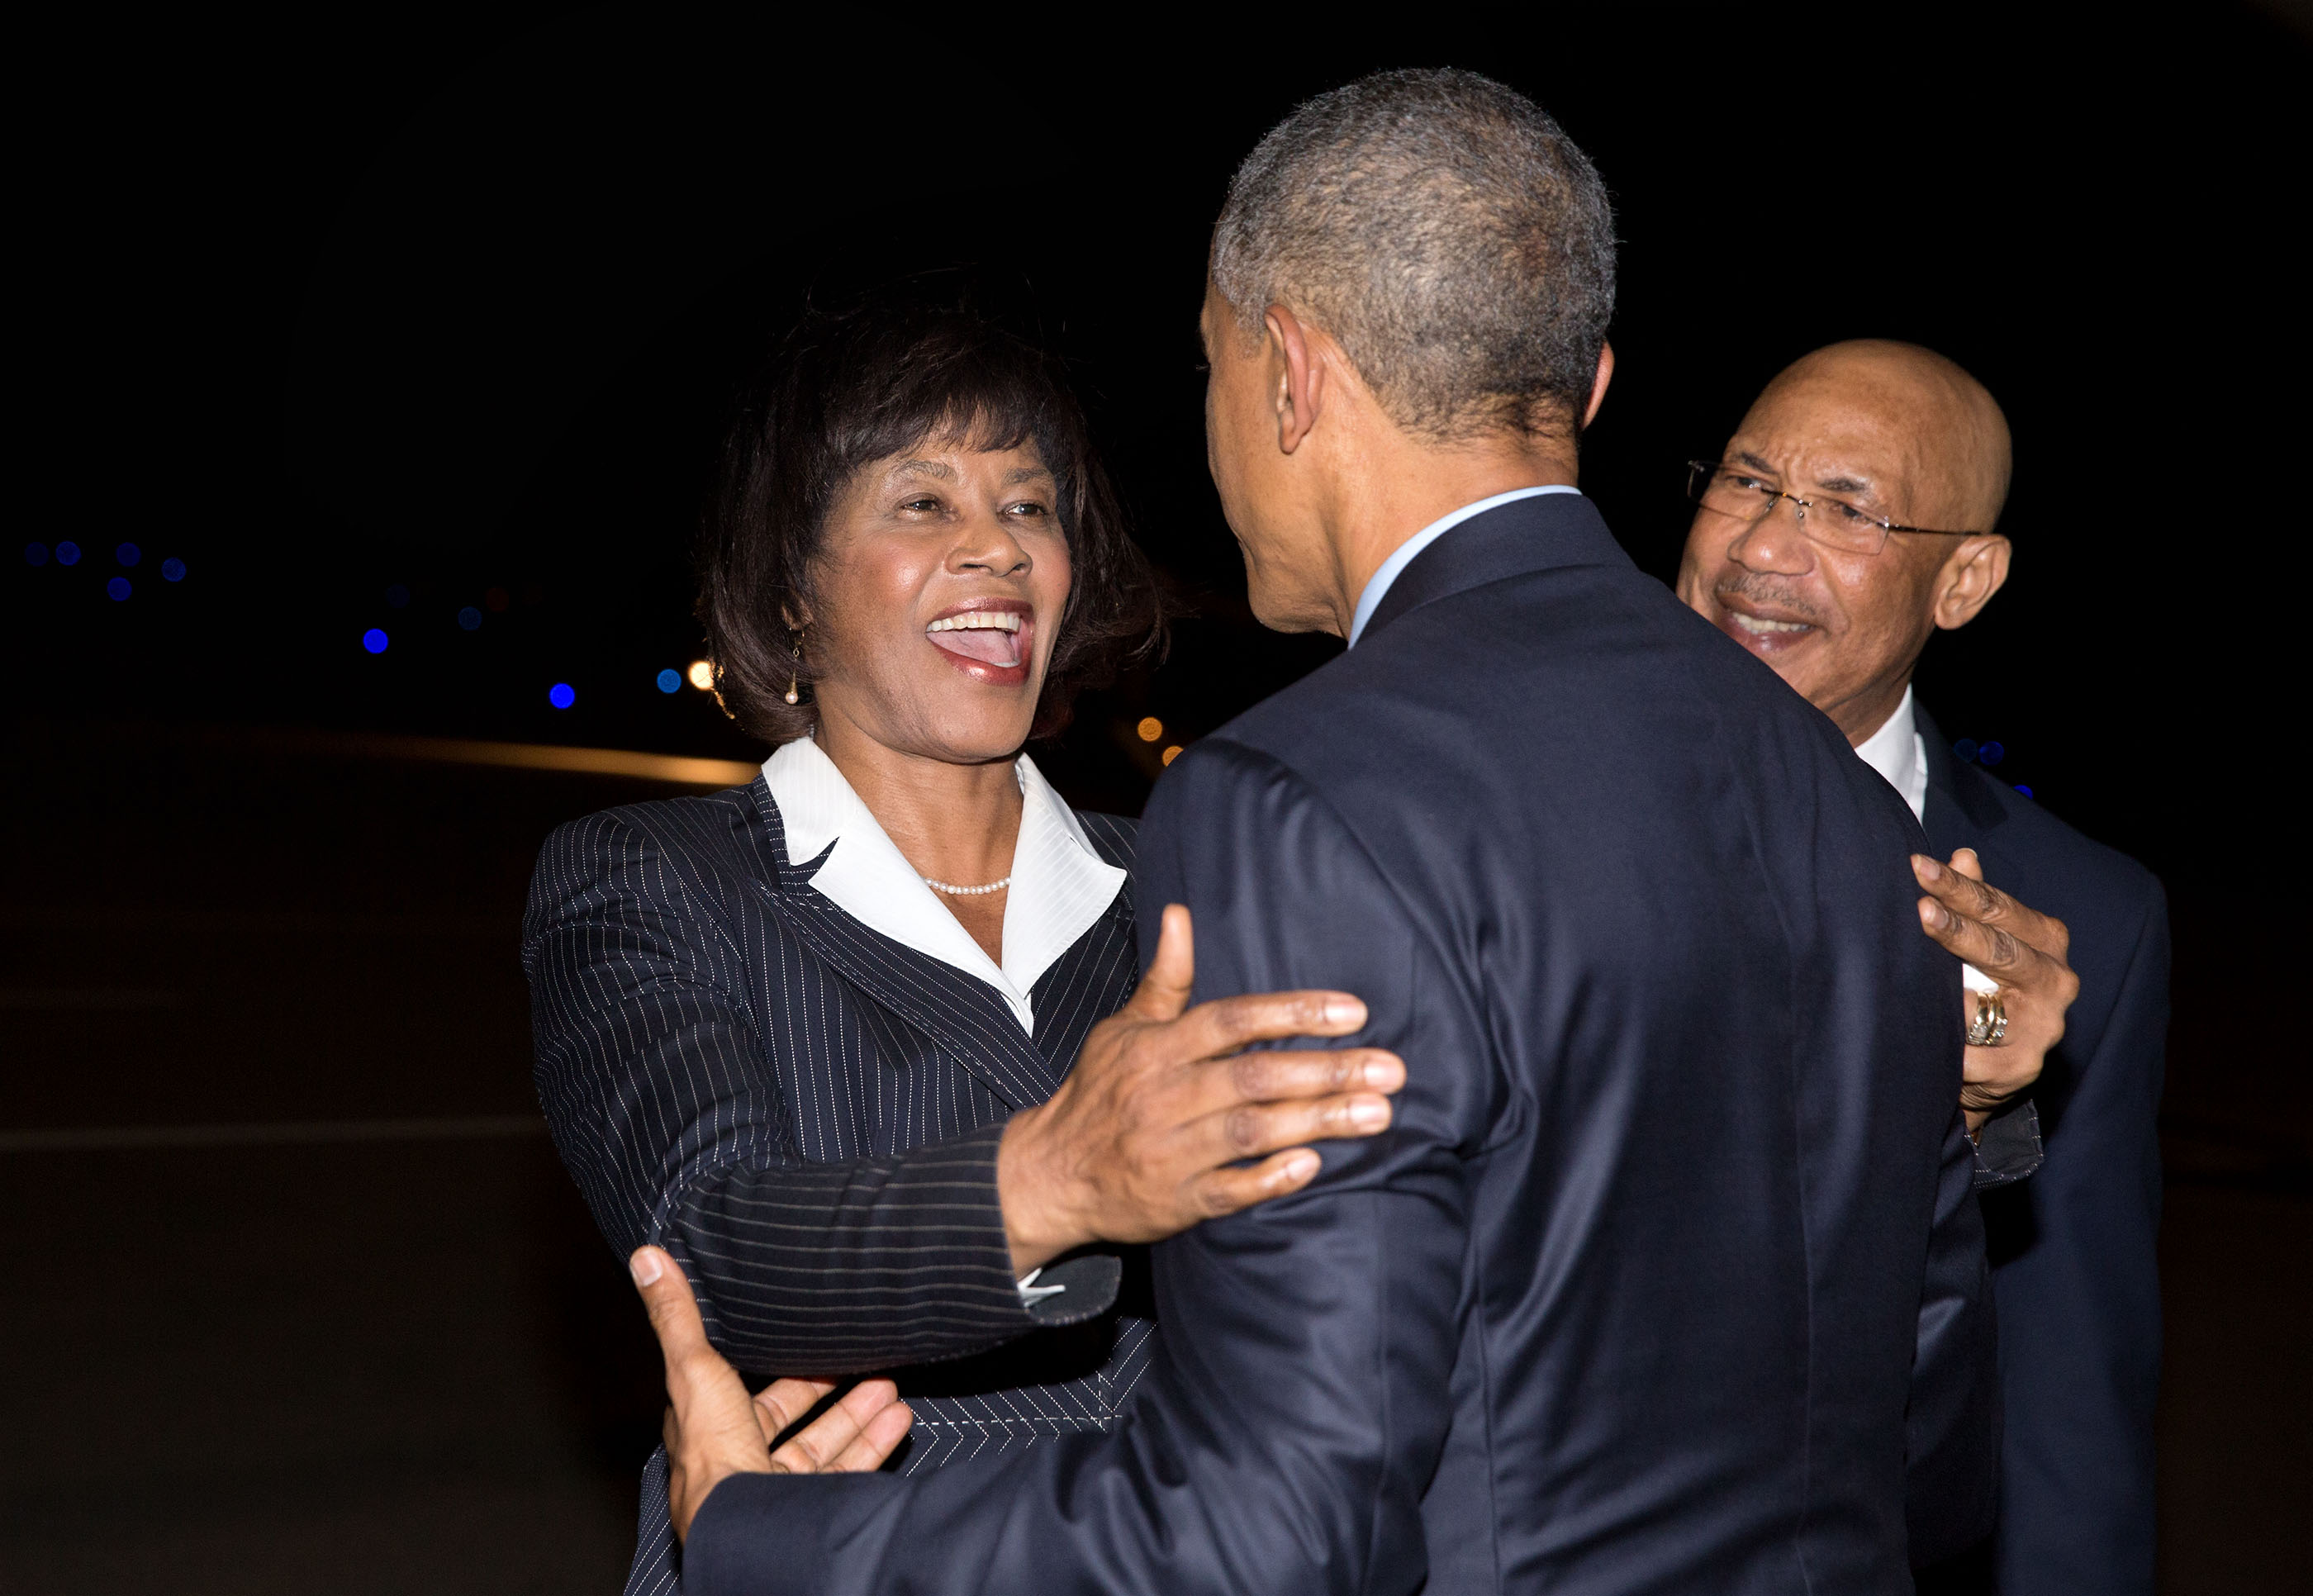 Prime Minister Portia Simpson Miller of Jamaica and Sir Patrick Allen, Governor-General, greet President Obama upon arrival in Kingston, Jamaica. (Official White House Photo by Pete Souza)